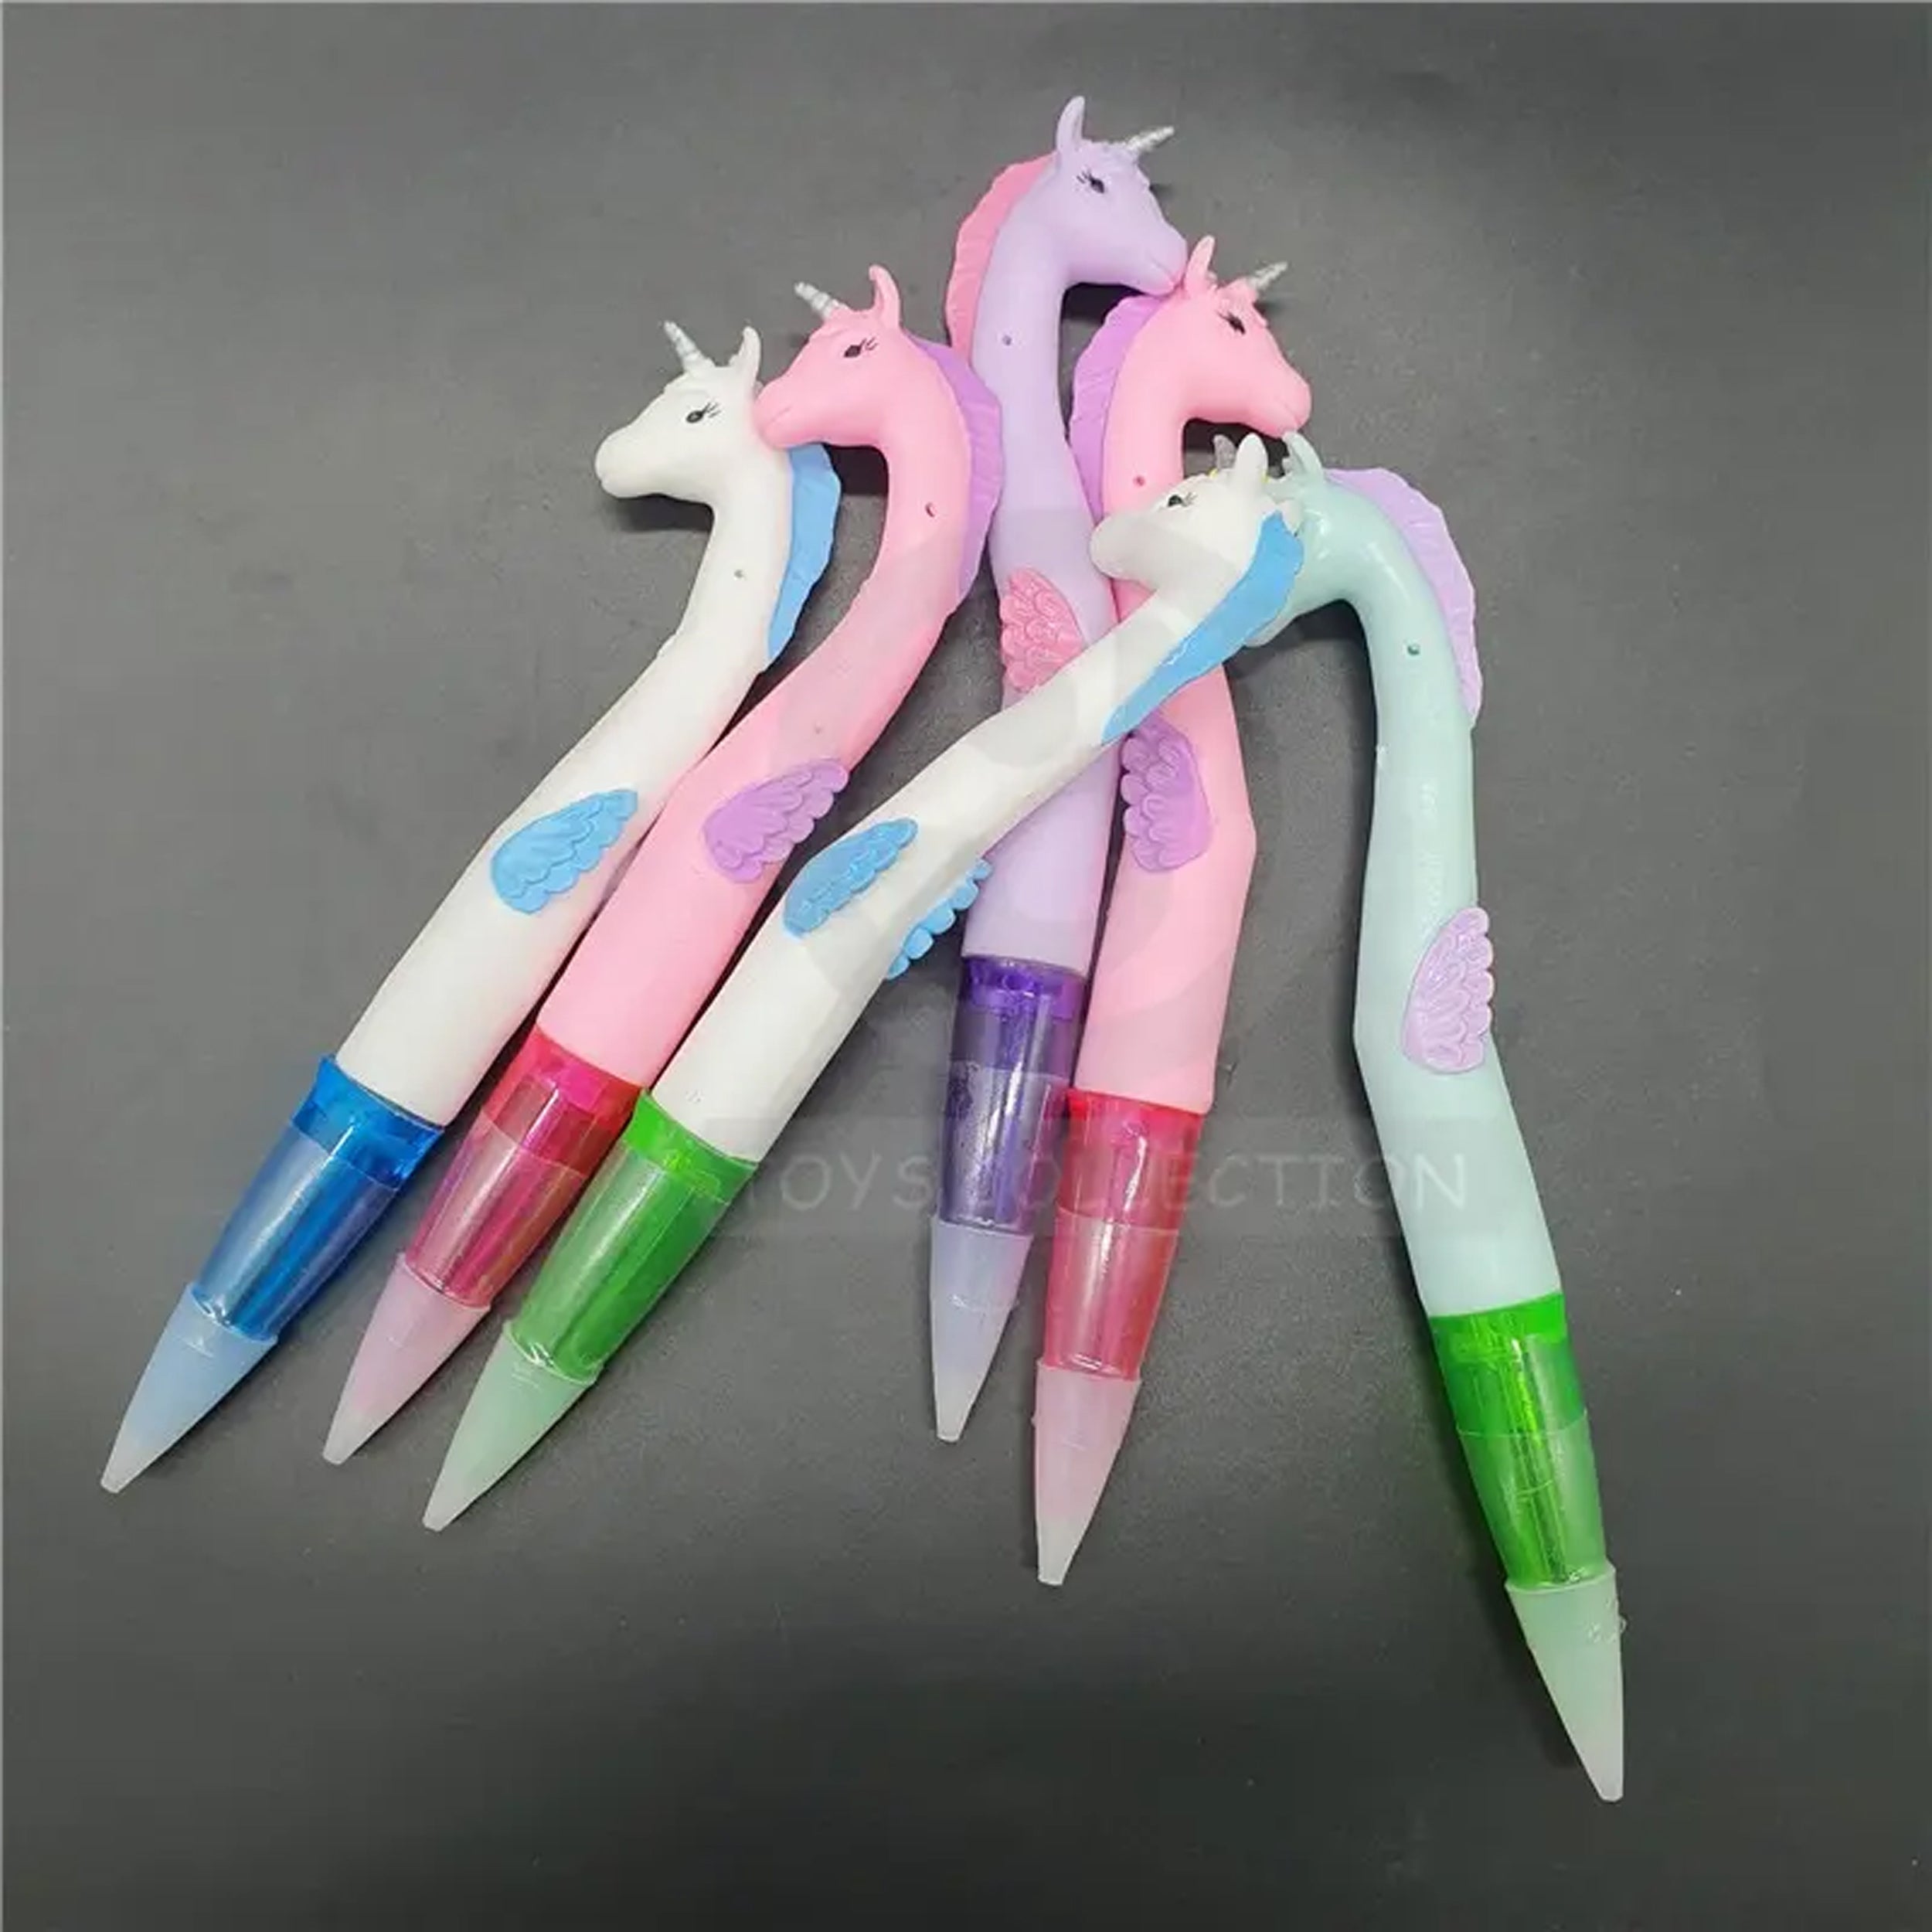 Unicorn School Office Supply Gift Creative Cute Pen Toys - Fun and Practical Way to Add Magic to Your Desk